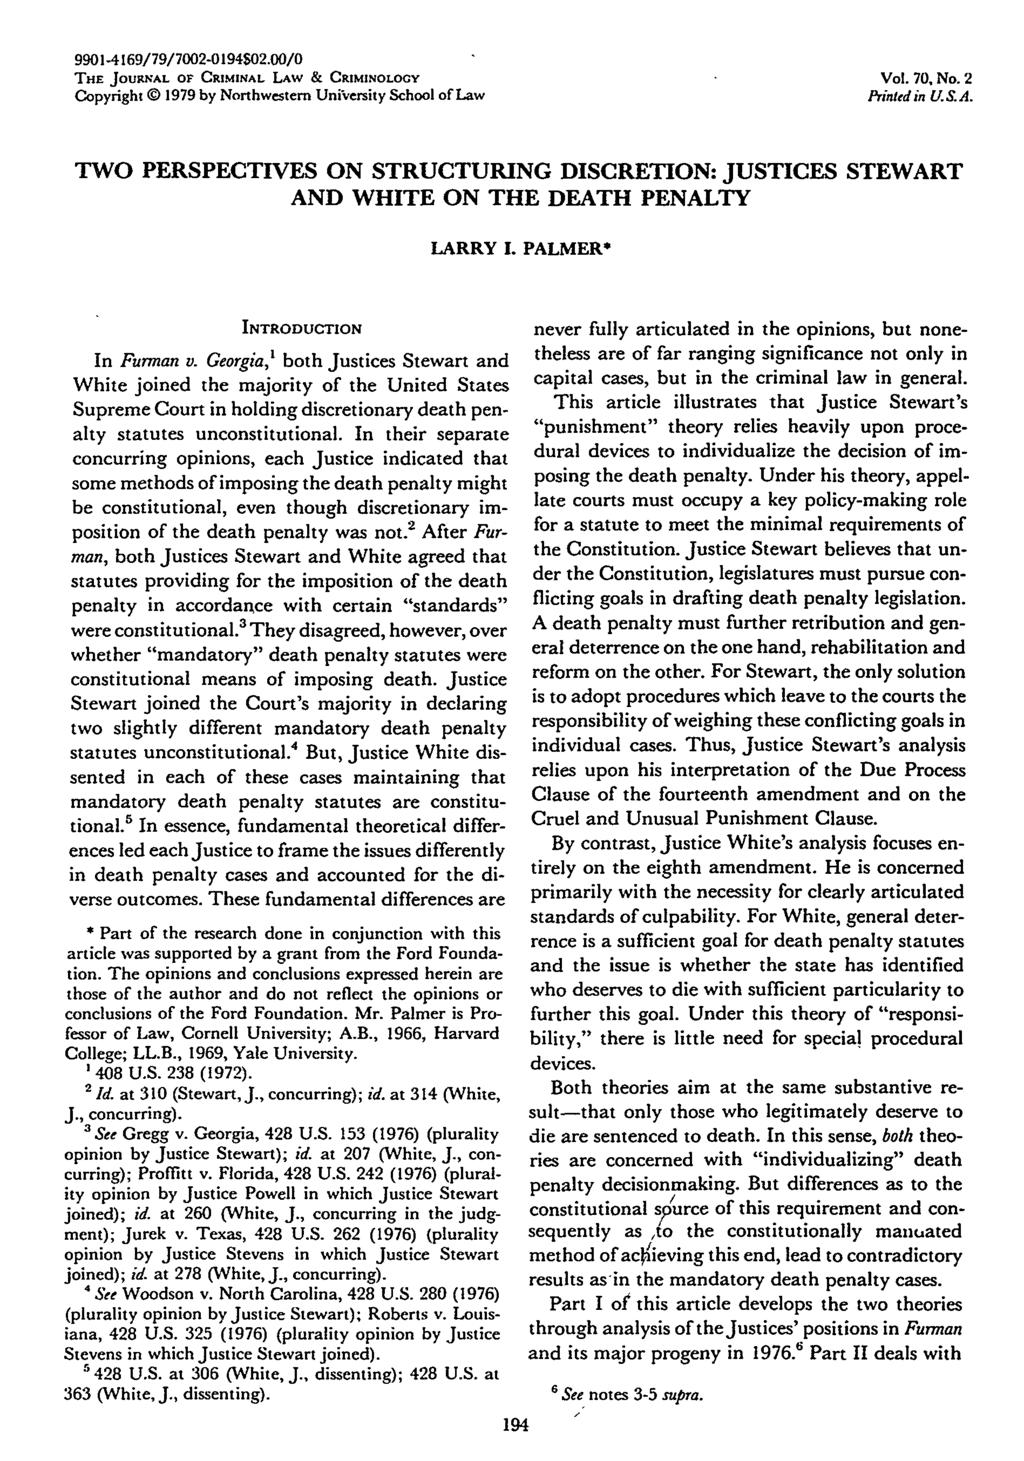 9901-4169/79/7002-0194S02.00/0 THE JouRNAL OF CRIMINAL LAW & CRIMINOLOGY Copyright 1979 by Nonhwestern University School of Law Vol. 70,No. 2 Printtd in U.S.A. TWO PERSPECTIVES ON STRUCTURING DISCRETION: JUSTICES STEWART AND WHITE ON THE DEATH PENALTY LARRY I.